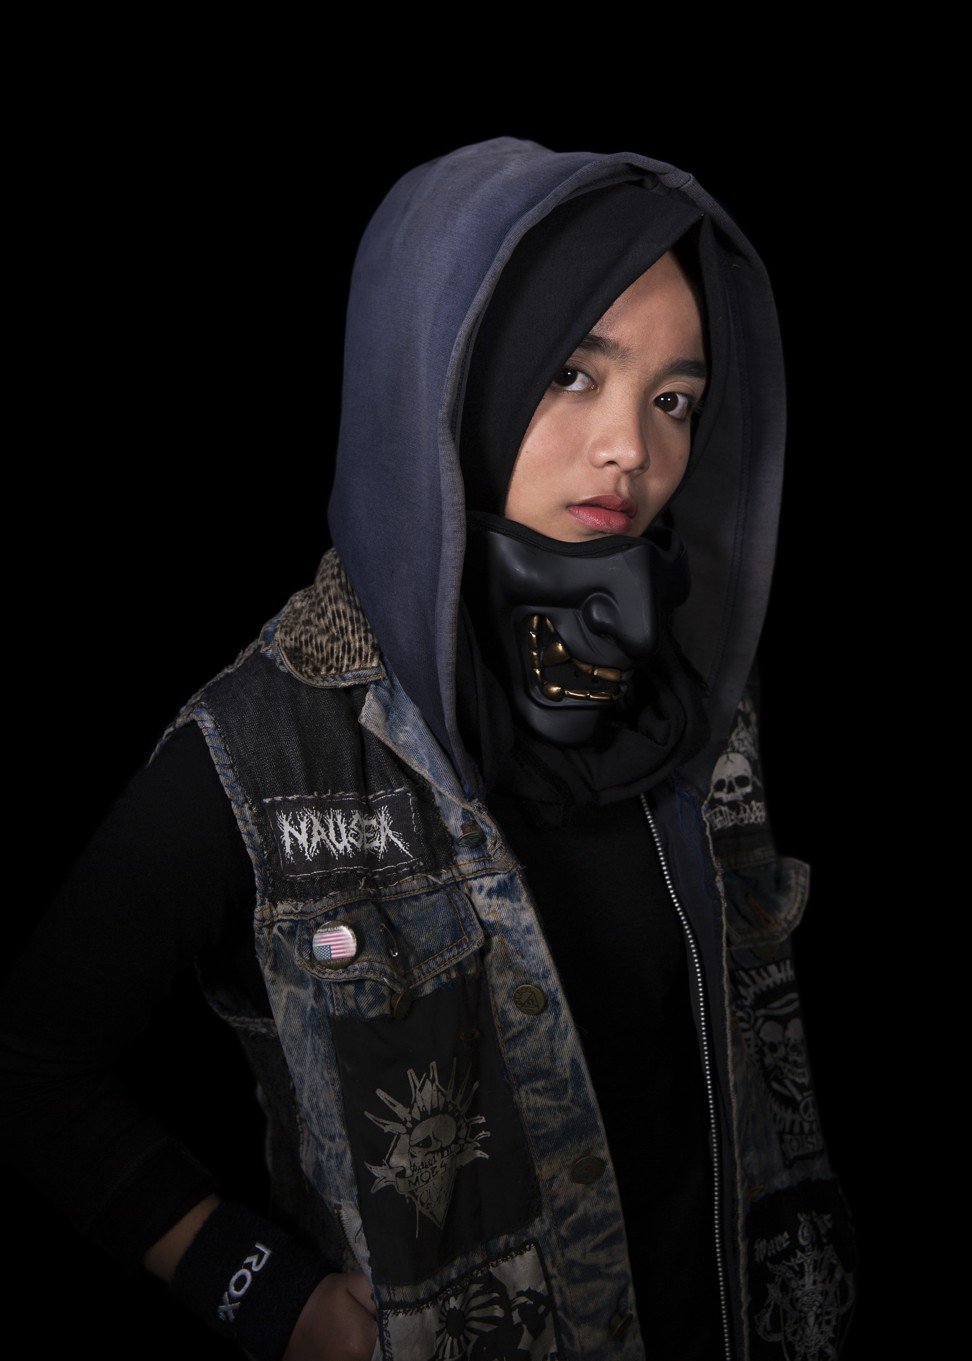 Kurnia says wearing a hijab is part of her identity as a Muslim woman. Photo: Abdul Abdullah and David Cholin